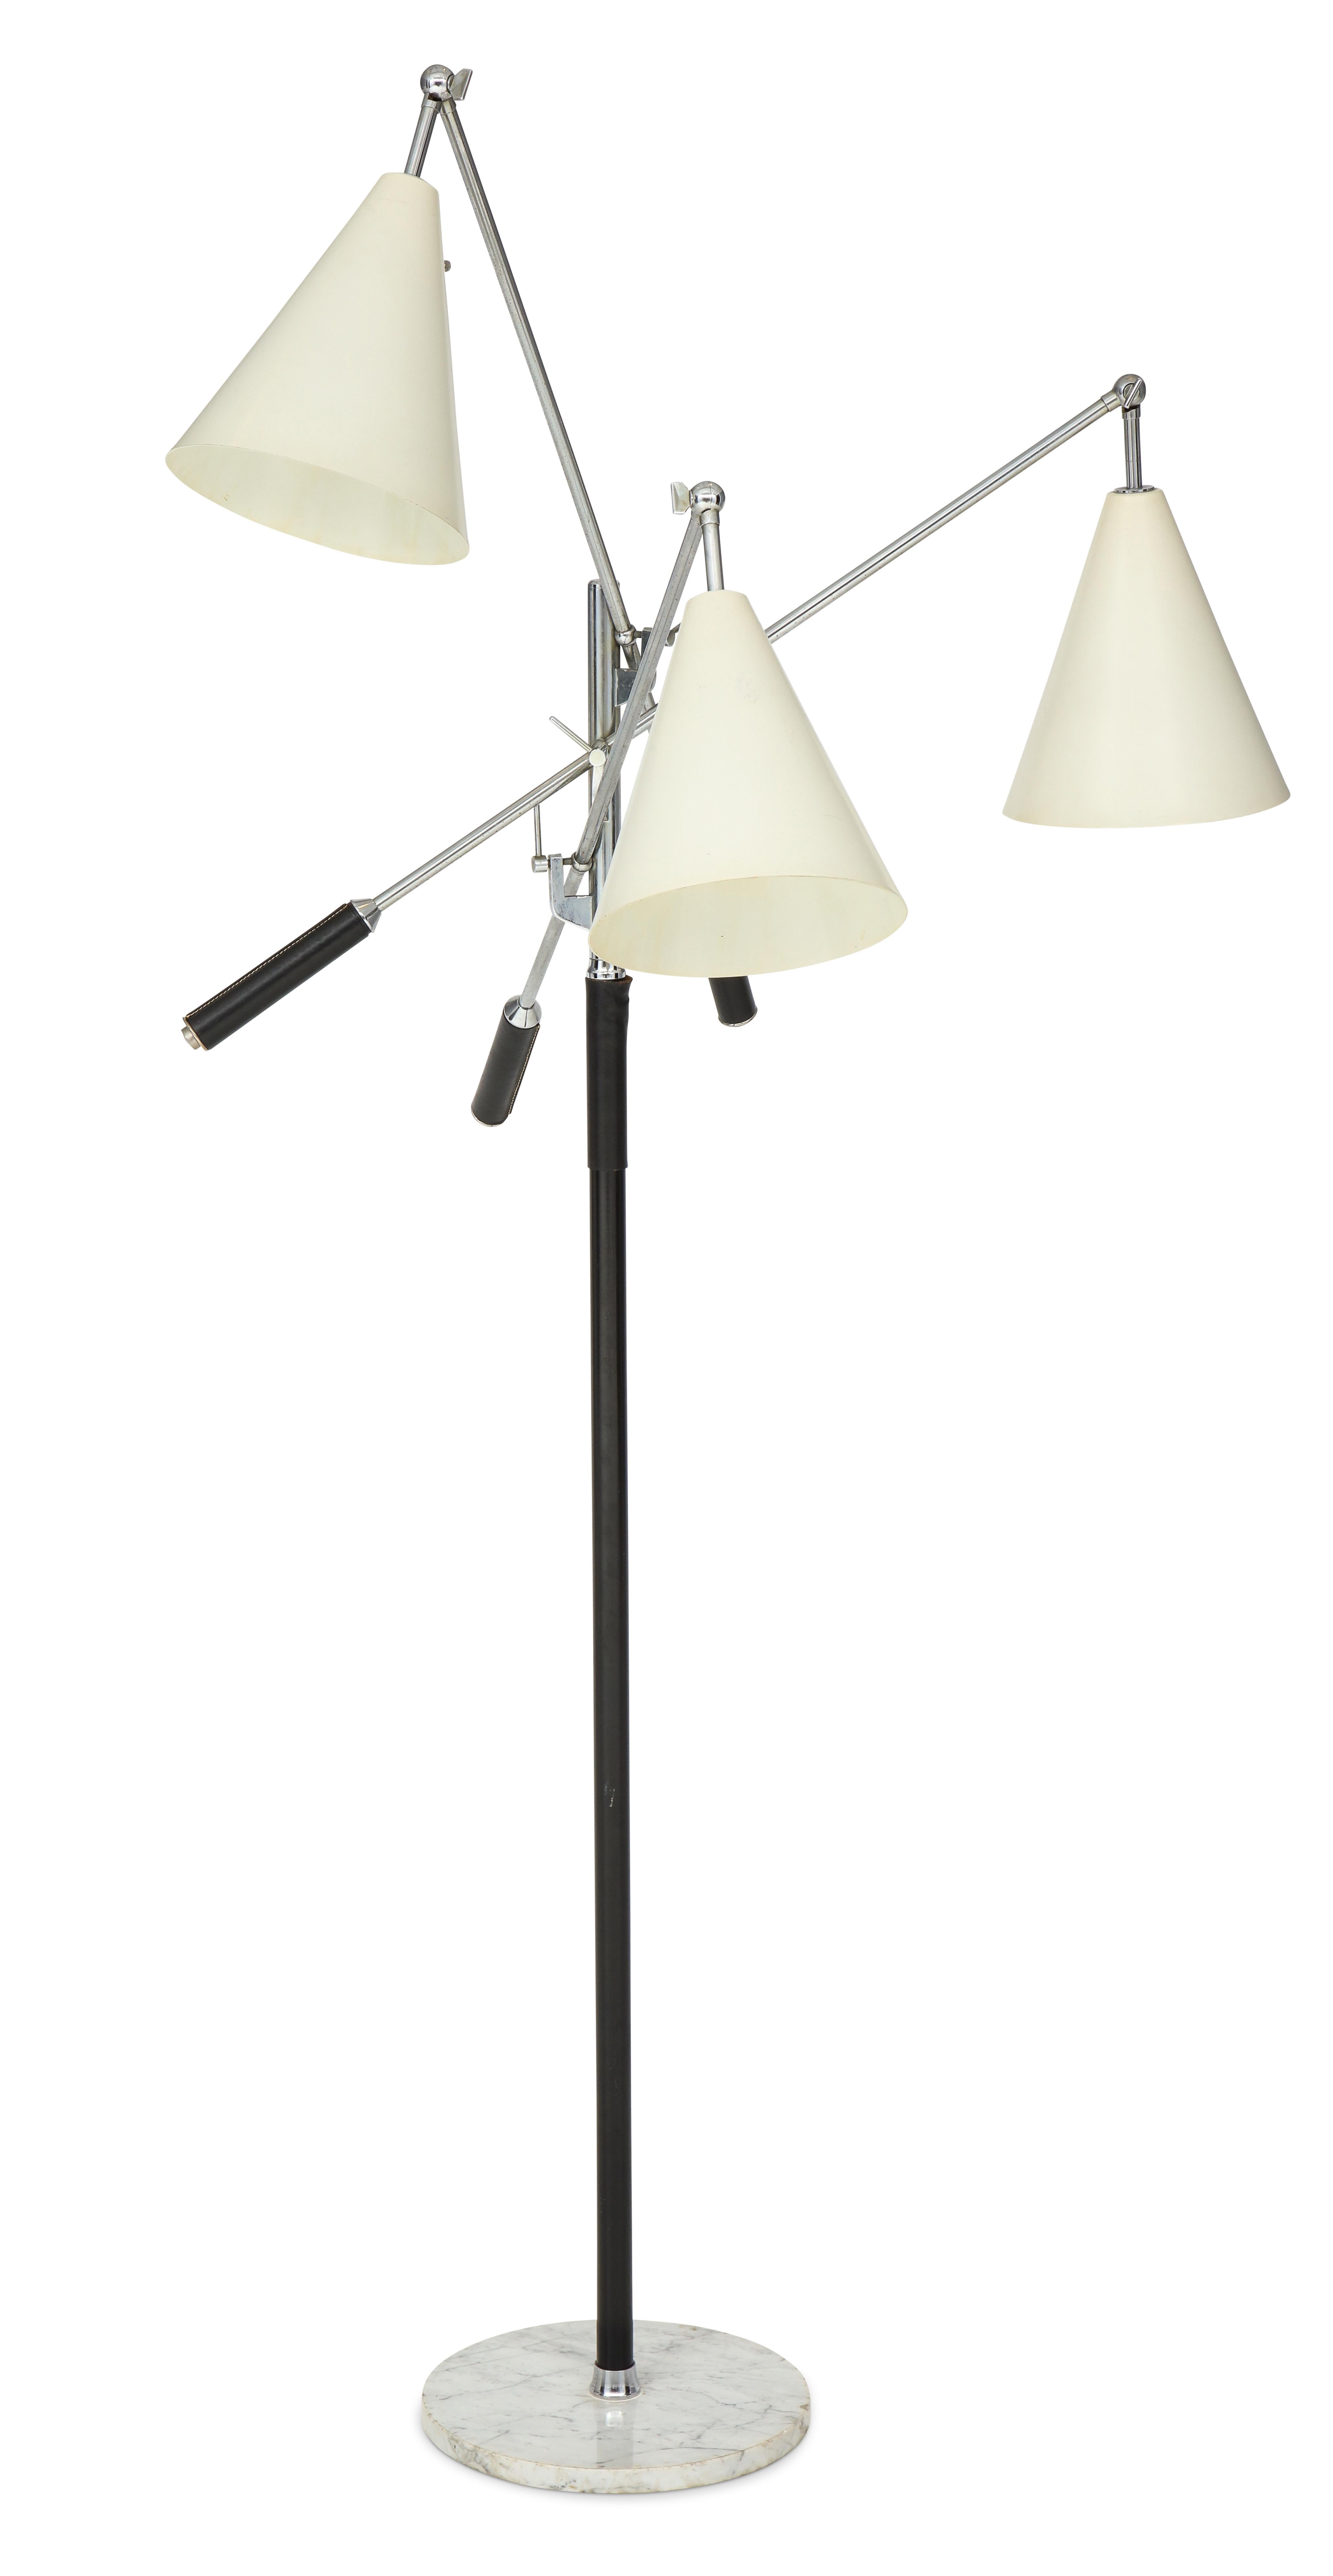 Rare early triennial floor lamp made out of lacquered and chromium-plated metal. Arms can be adjusted in variable positions. Designed by Angelo Lelli / Arredoluce and manufactured in NYC by Richards-Morgenthau. Similar example can be found in 